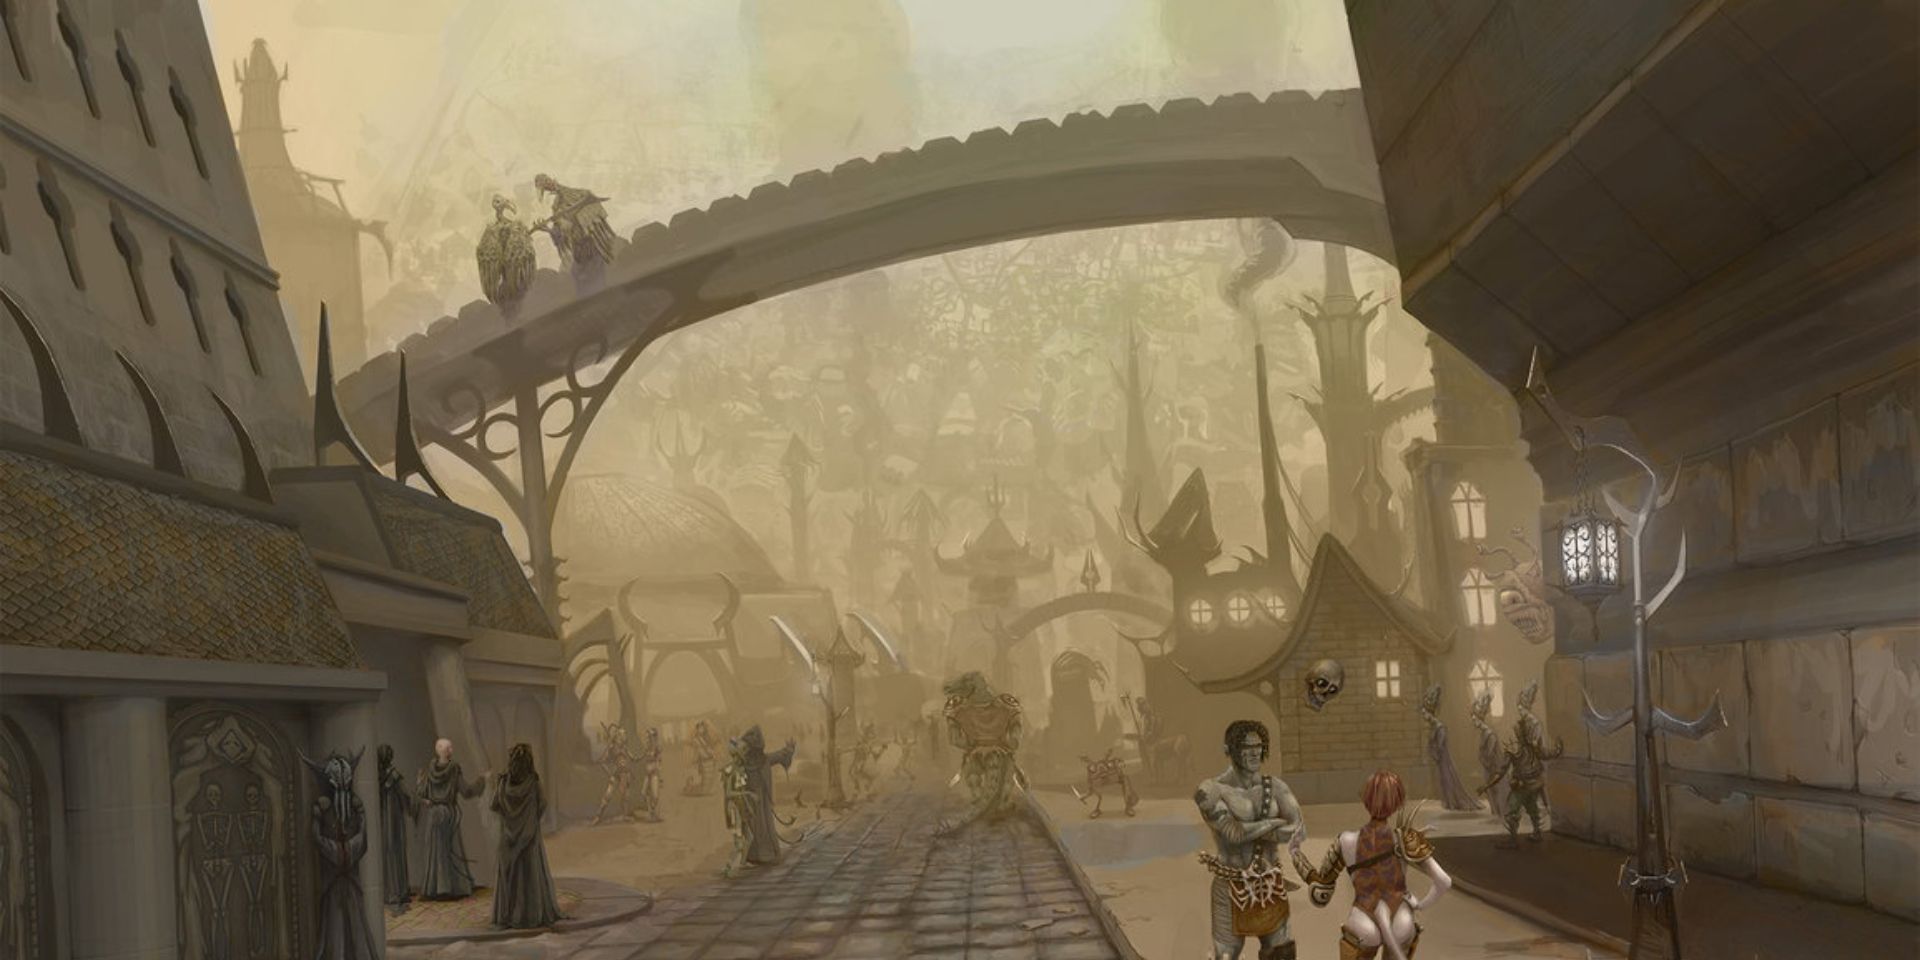 View of a city street in D&D's Planescape setting, with a footbridge spanning above and a gnarled forest in the background.